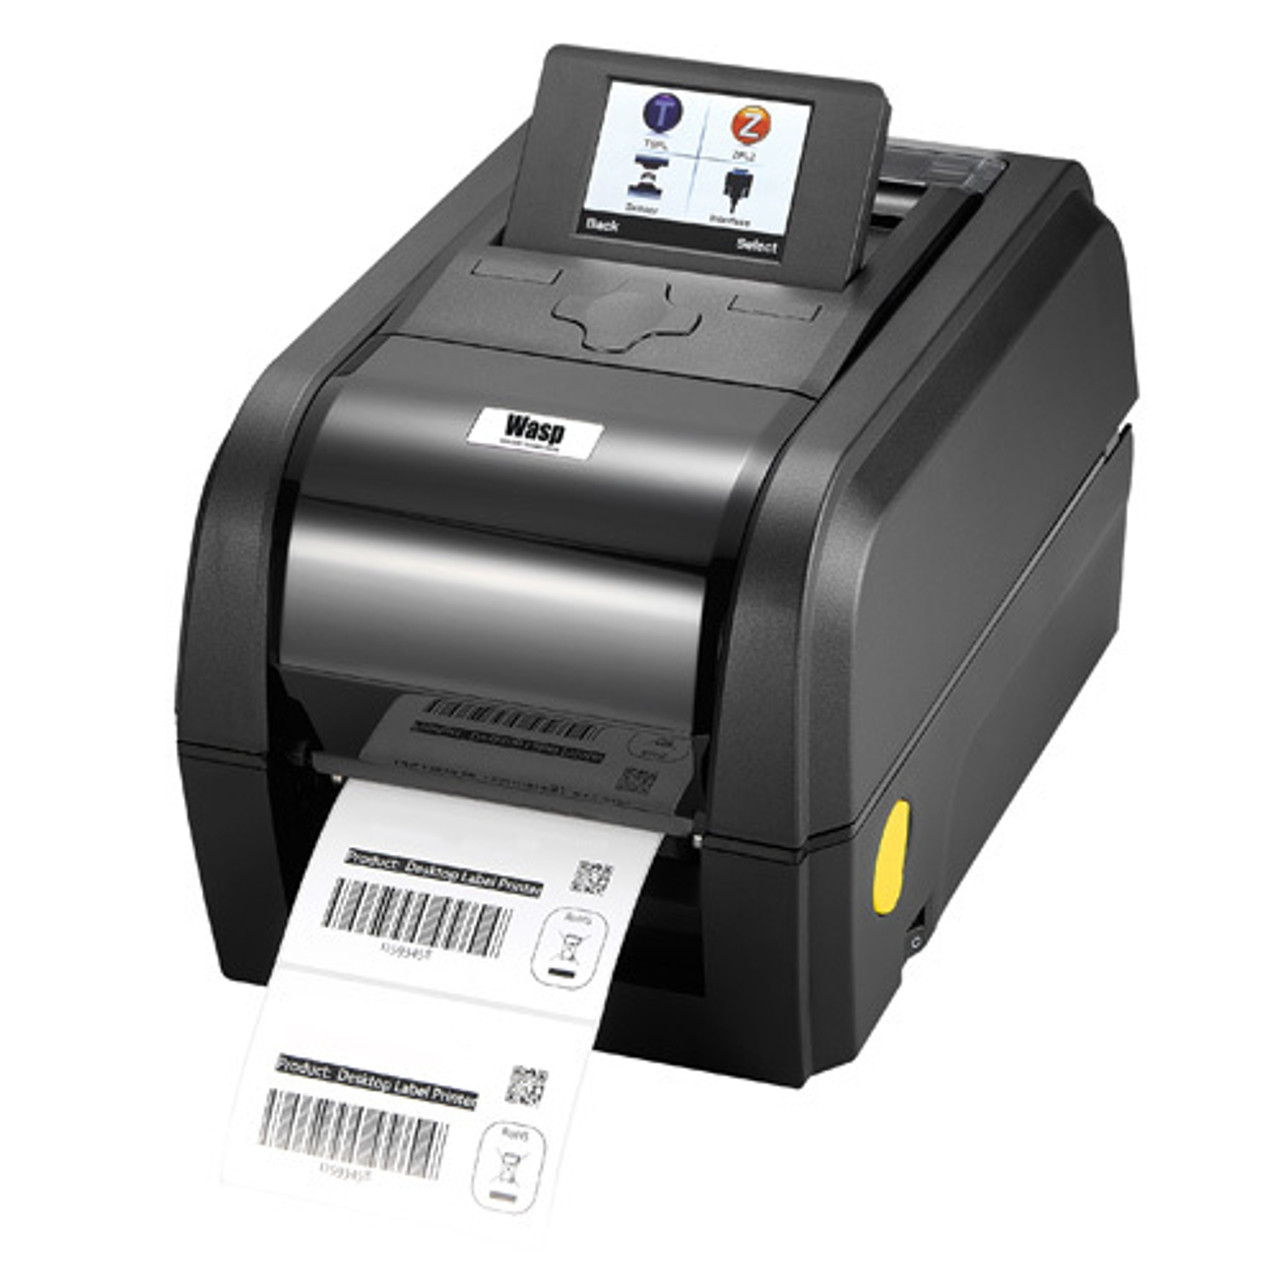 ZEBRA ZD421 Direct Thermal Desktop Printer 300 dpi Print Width 4-inch Wired USB and 802.11ac Connectivity ZD4A043-D01W01EZ, No Thermal Ribbon Required - 1